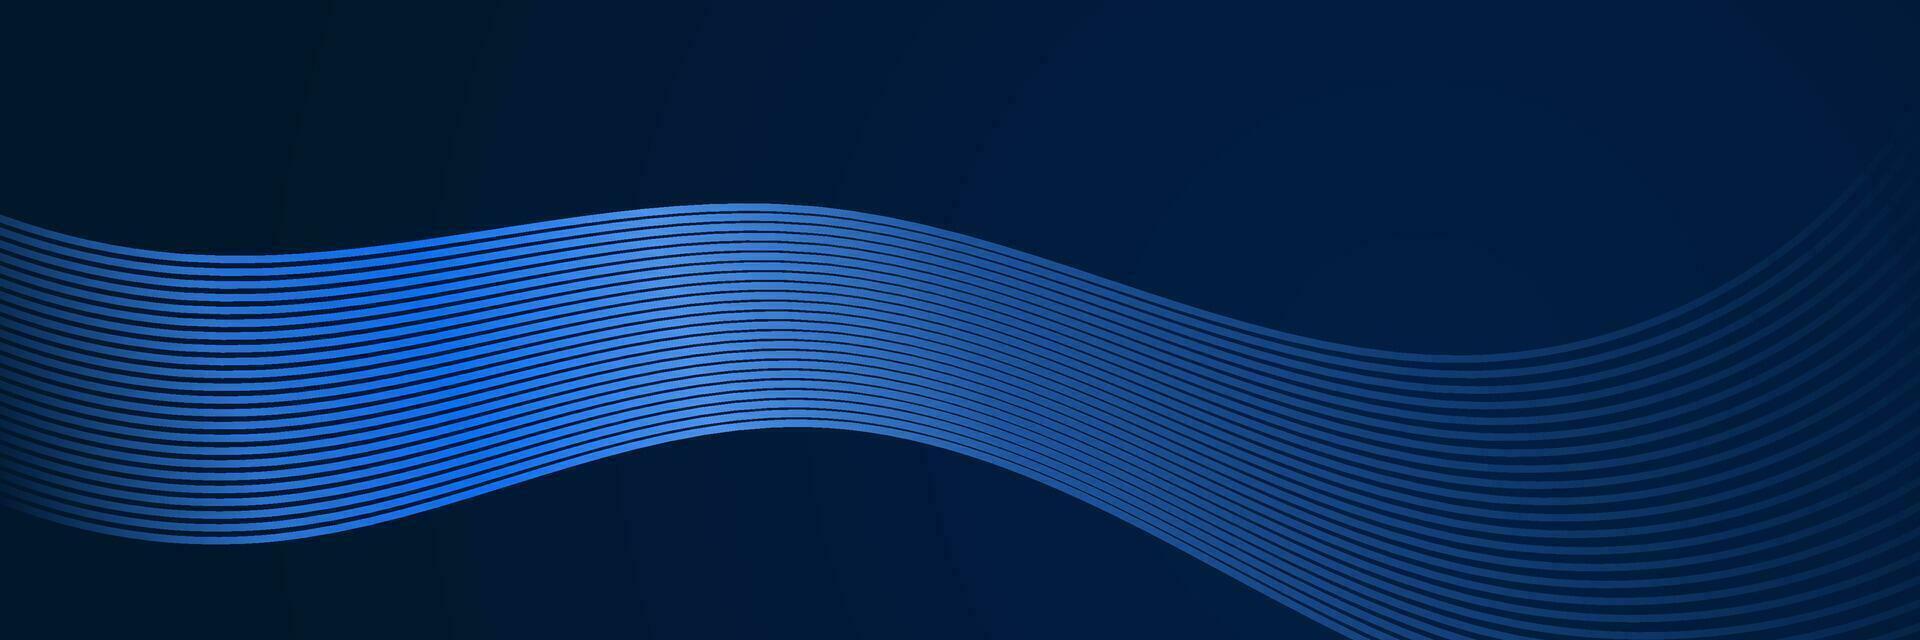 abstract business dark blue background with glowing lines vector